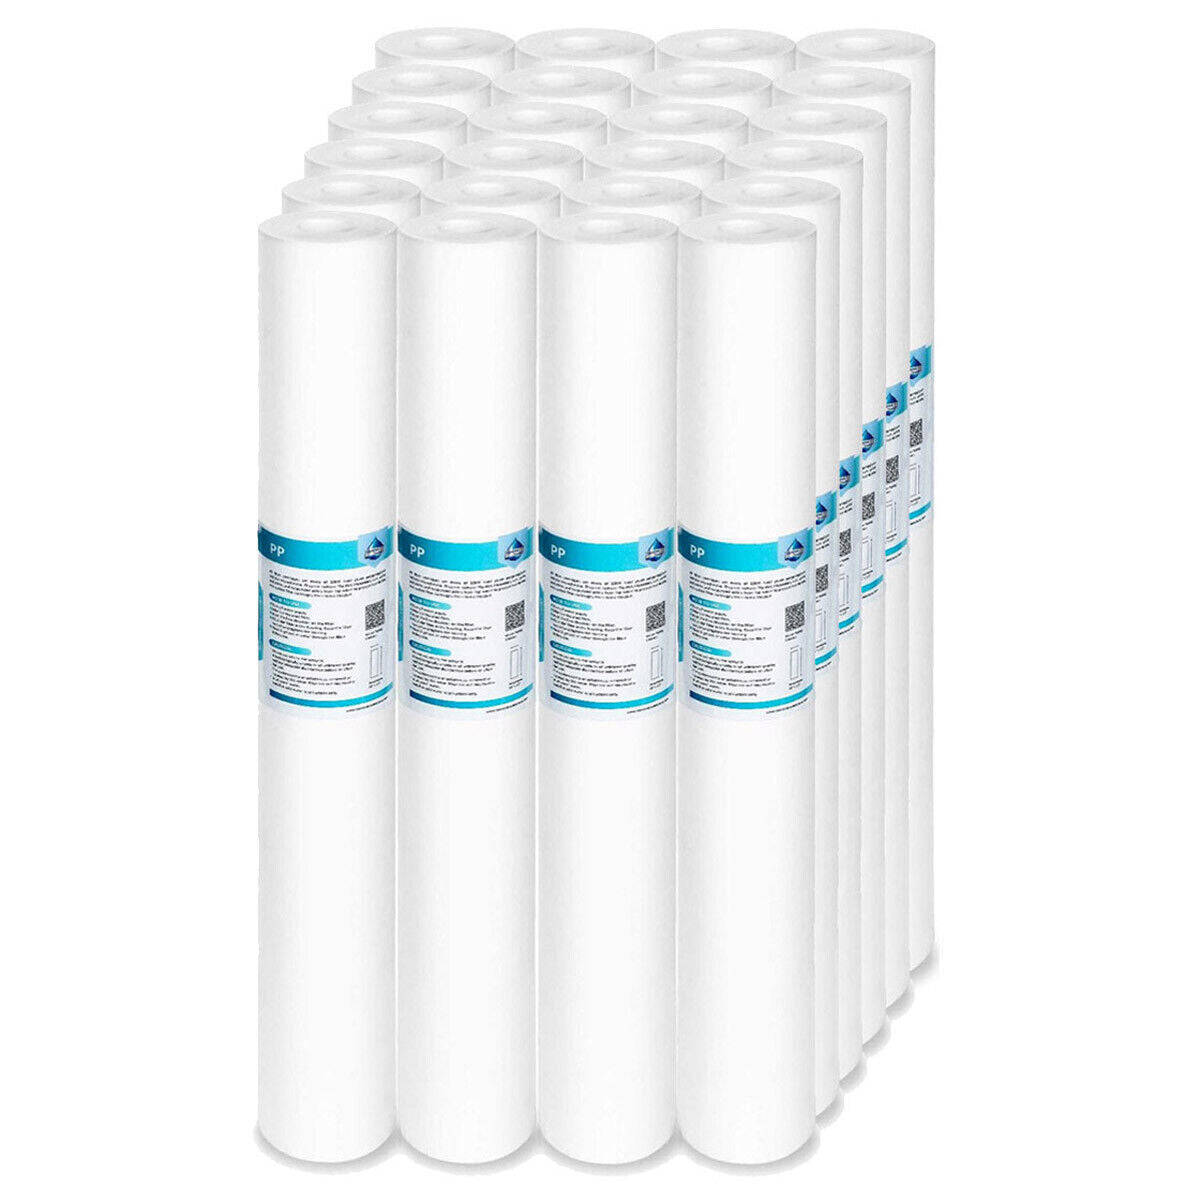 Membrane Solutions 20" x 2.5" Polypropylene Sediment Water Filter Replacement Cartridge for Whole House Filter System